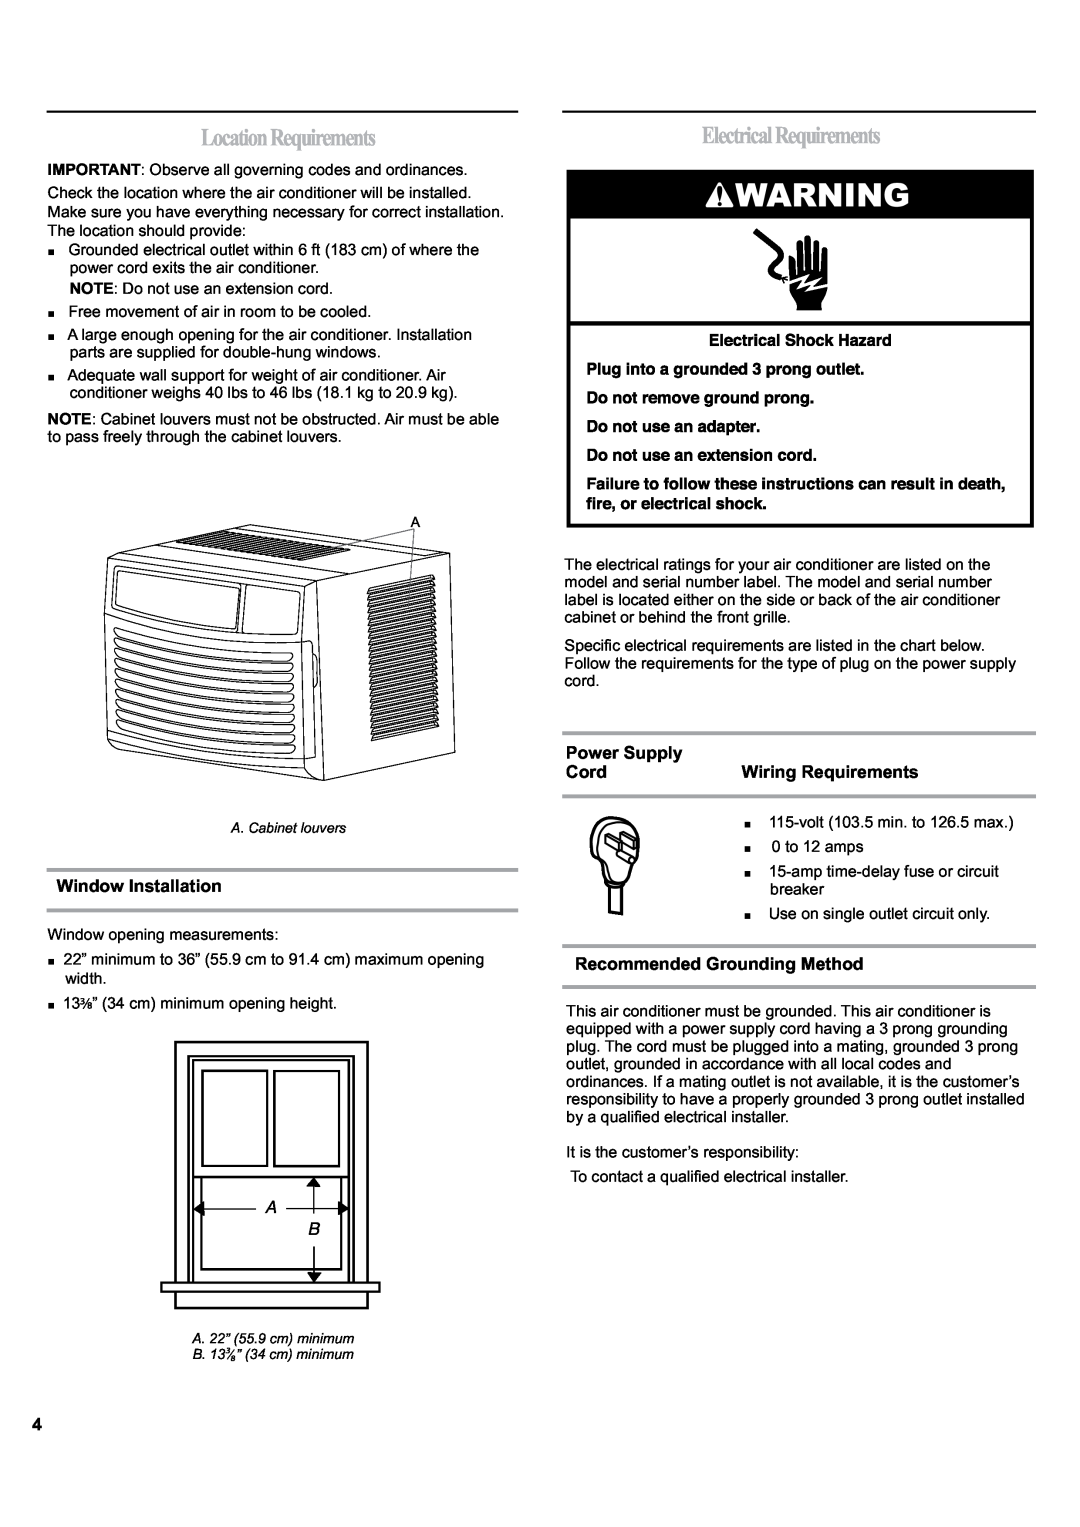 Haier ESA405K manual LocationRequirements, ElectricalRequirements, Window Installation, Power Supply, Cord 